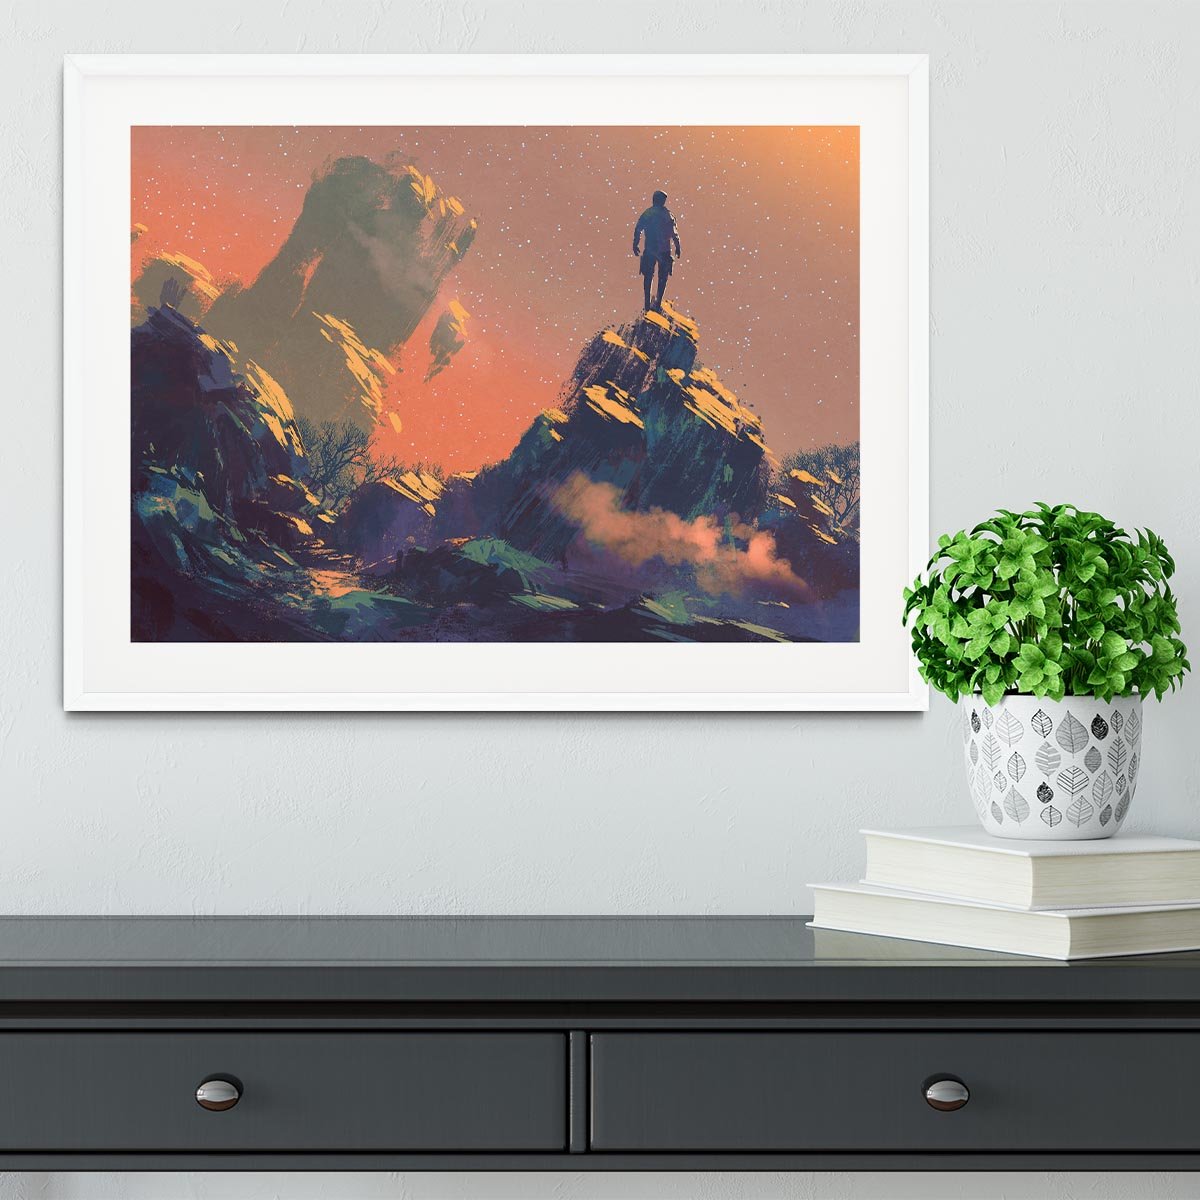 Top of the hill watching the stars Framed Print - Canvas Art Rocks - 5